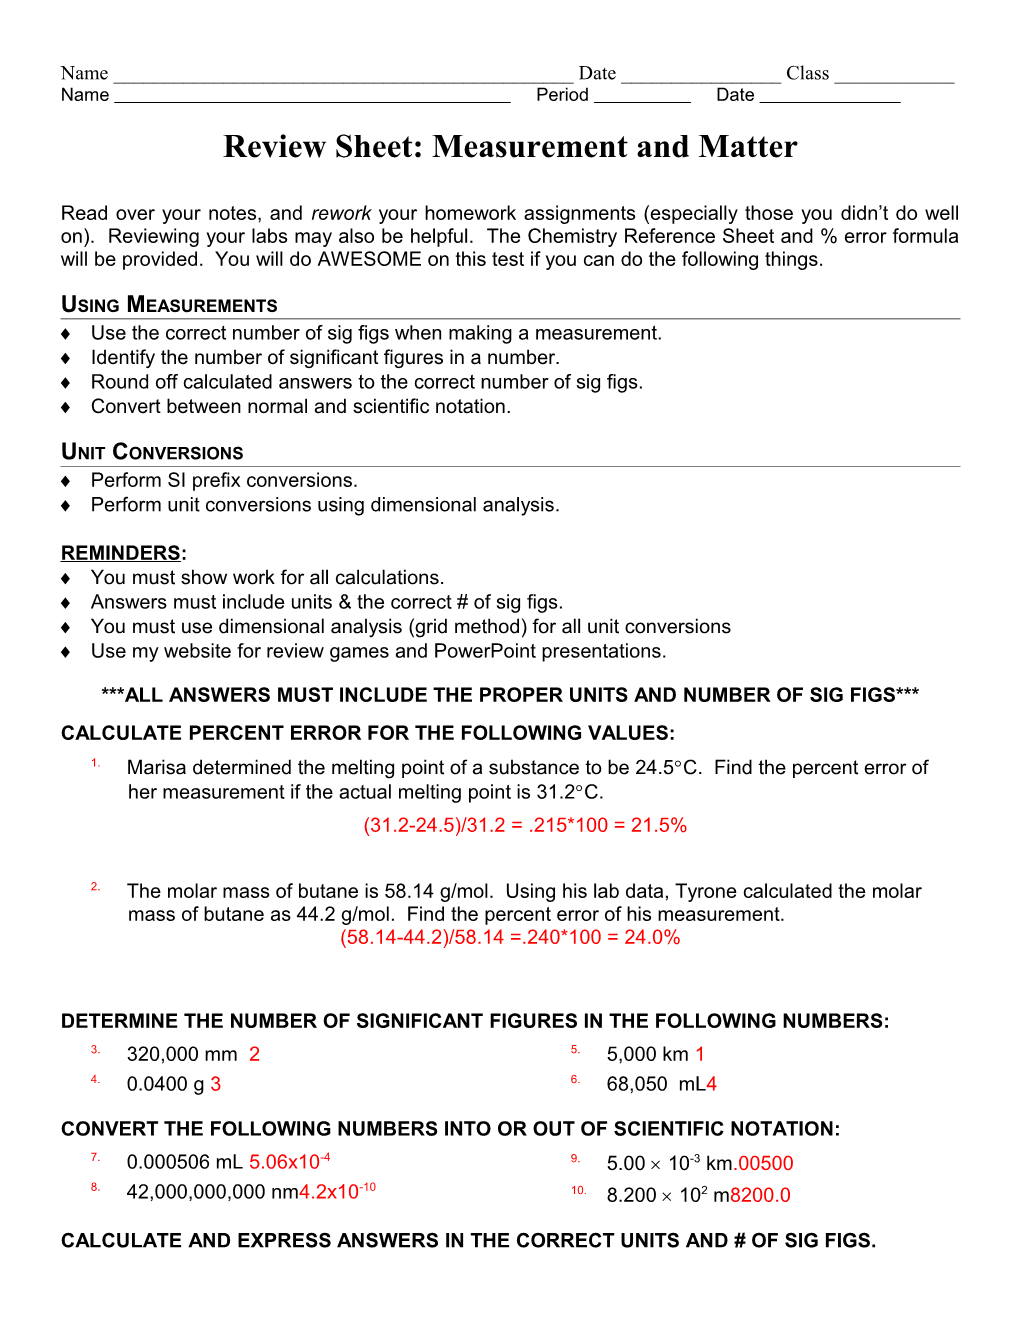 Review Sheet: Measurement and Matter